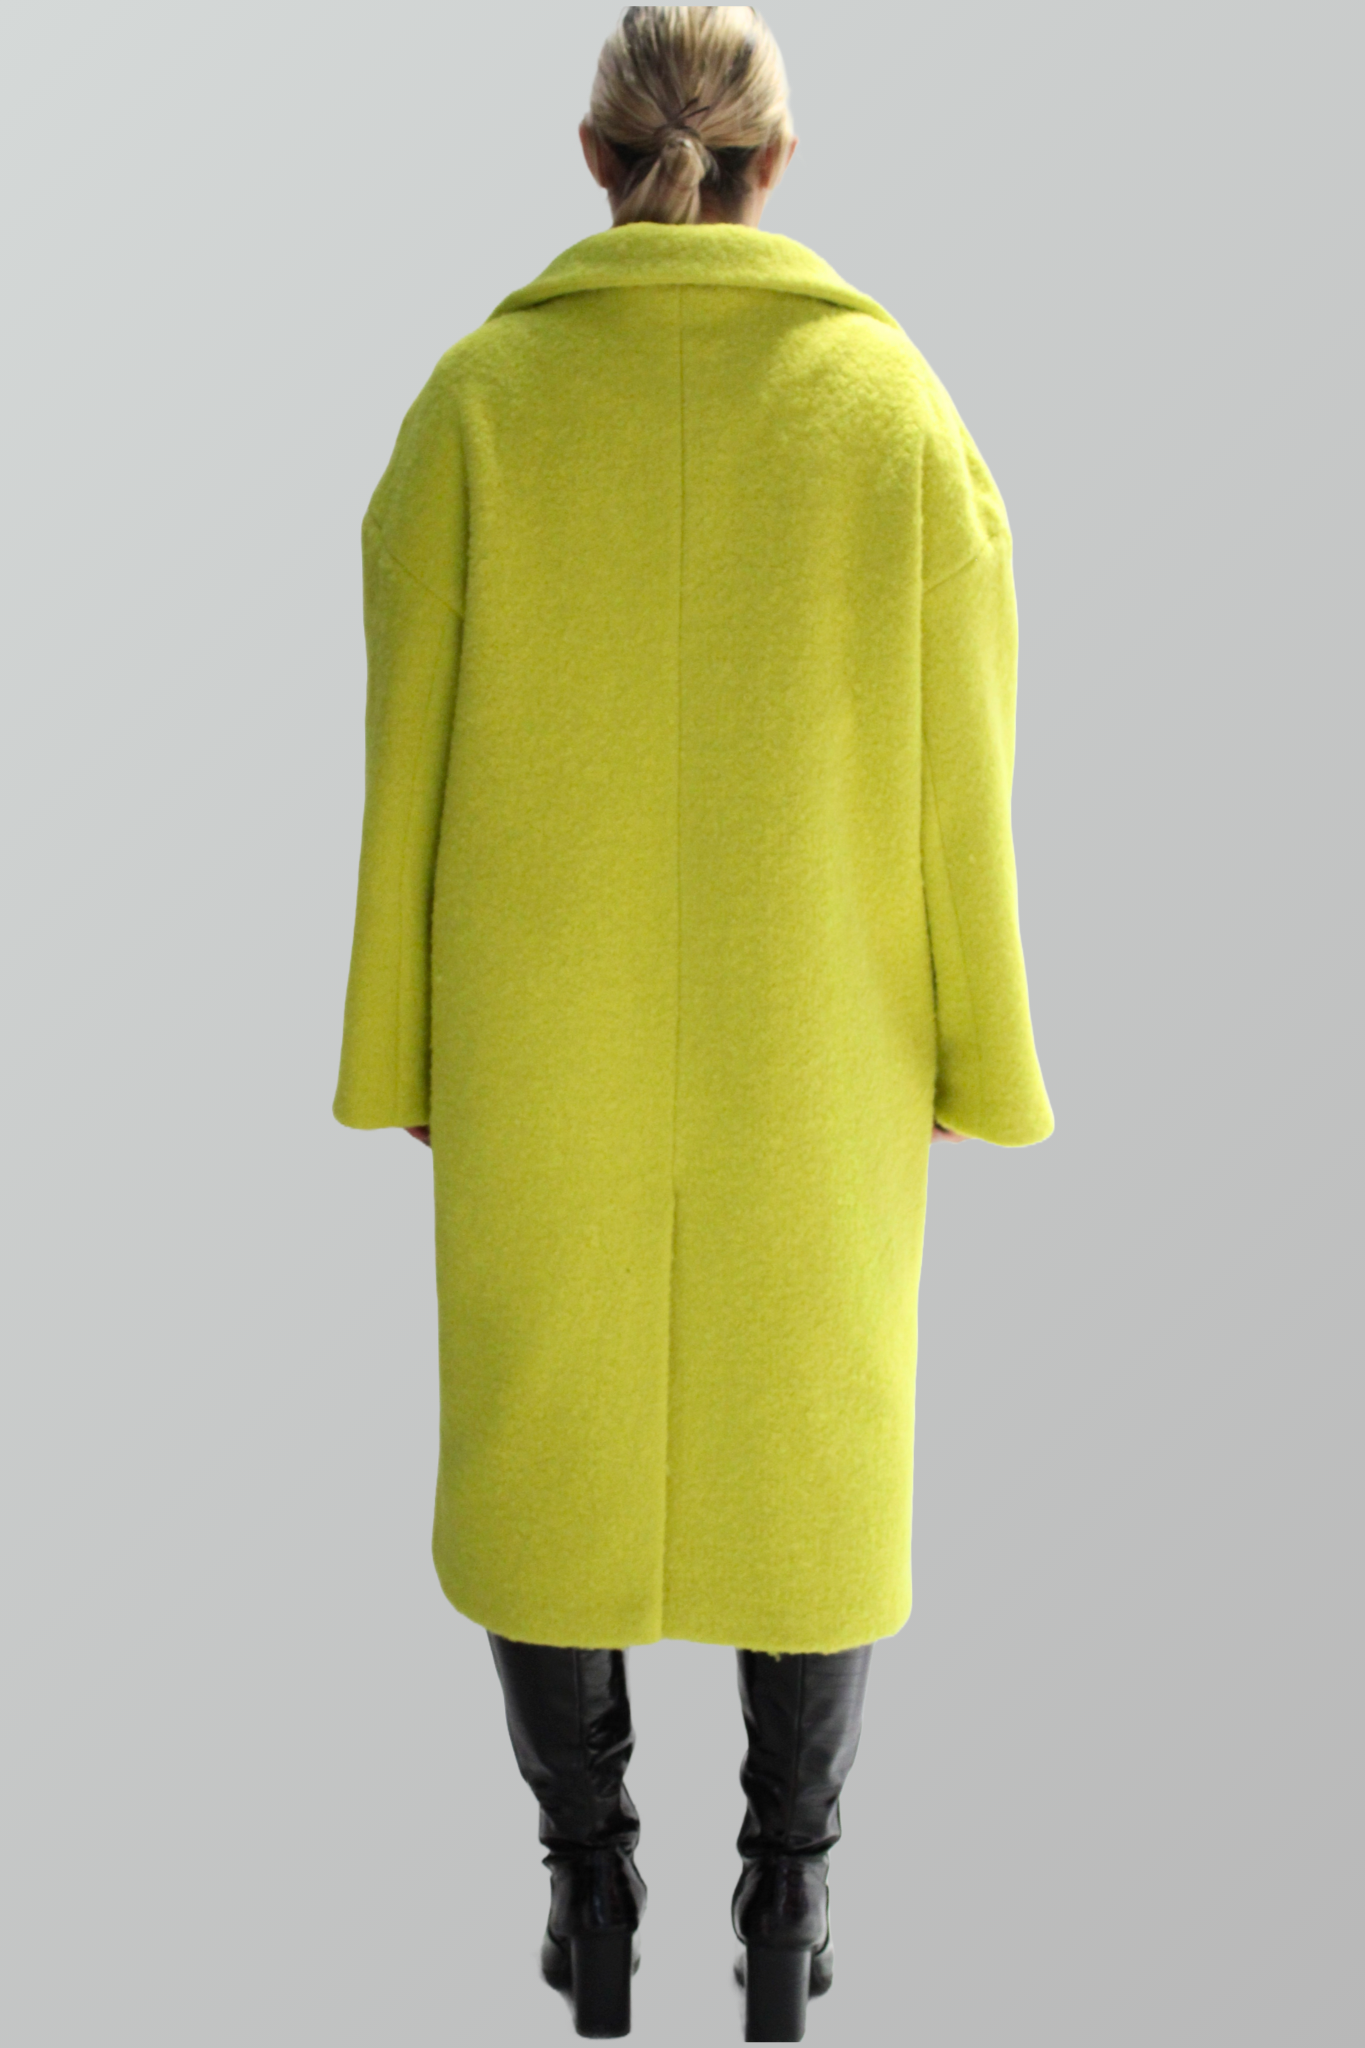 Wool Coat in Lime green with long sleeves, pockets and magnetic-button fastening.